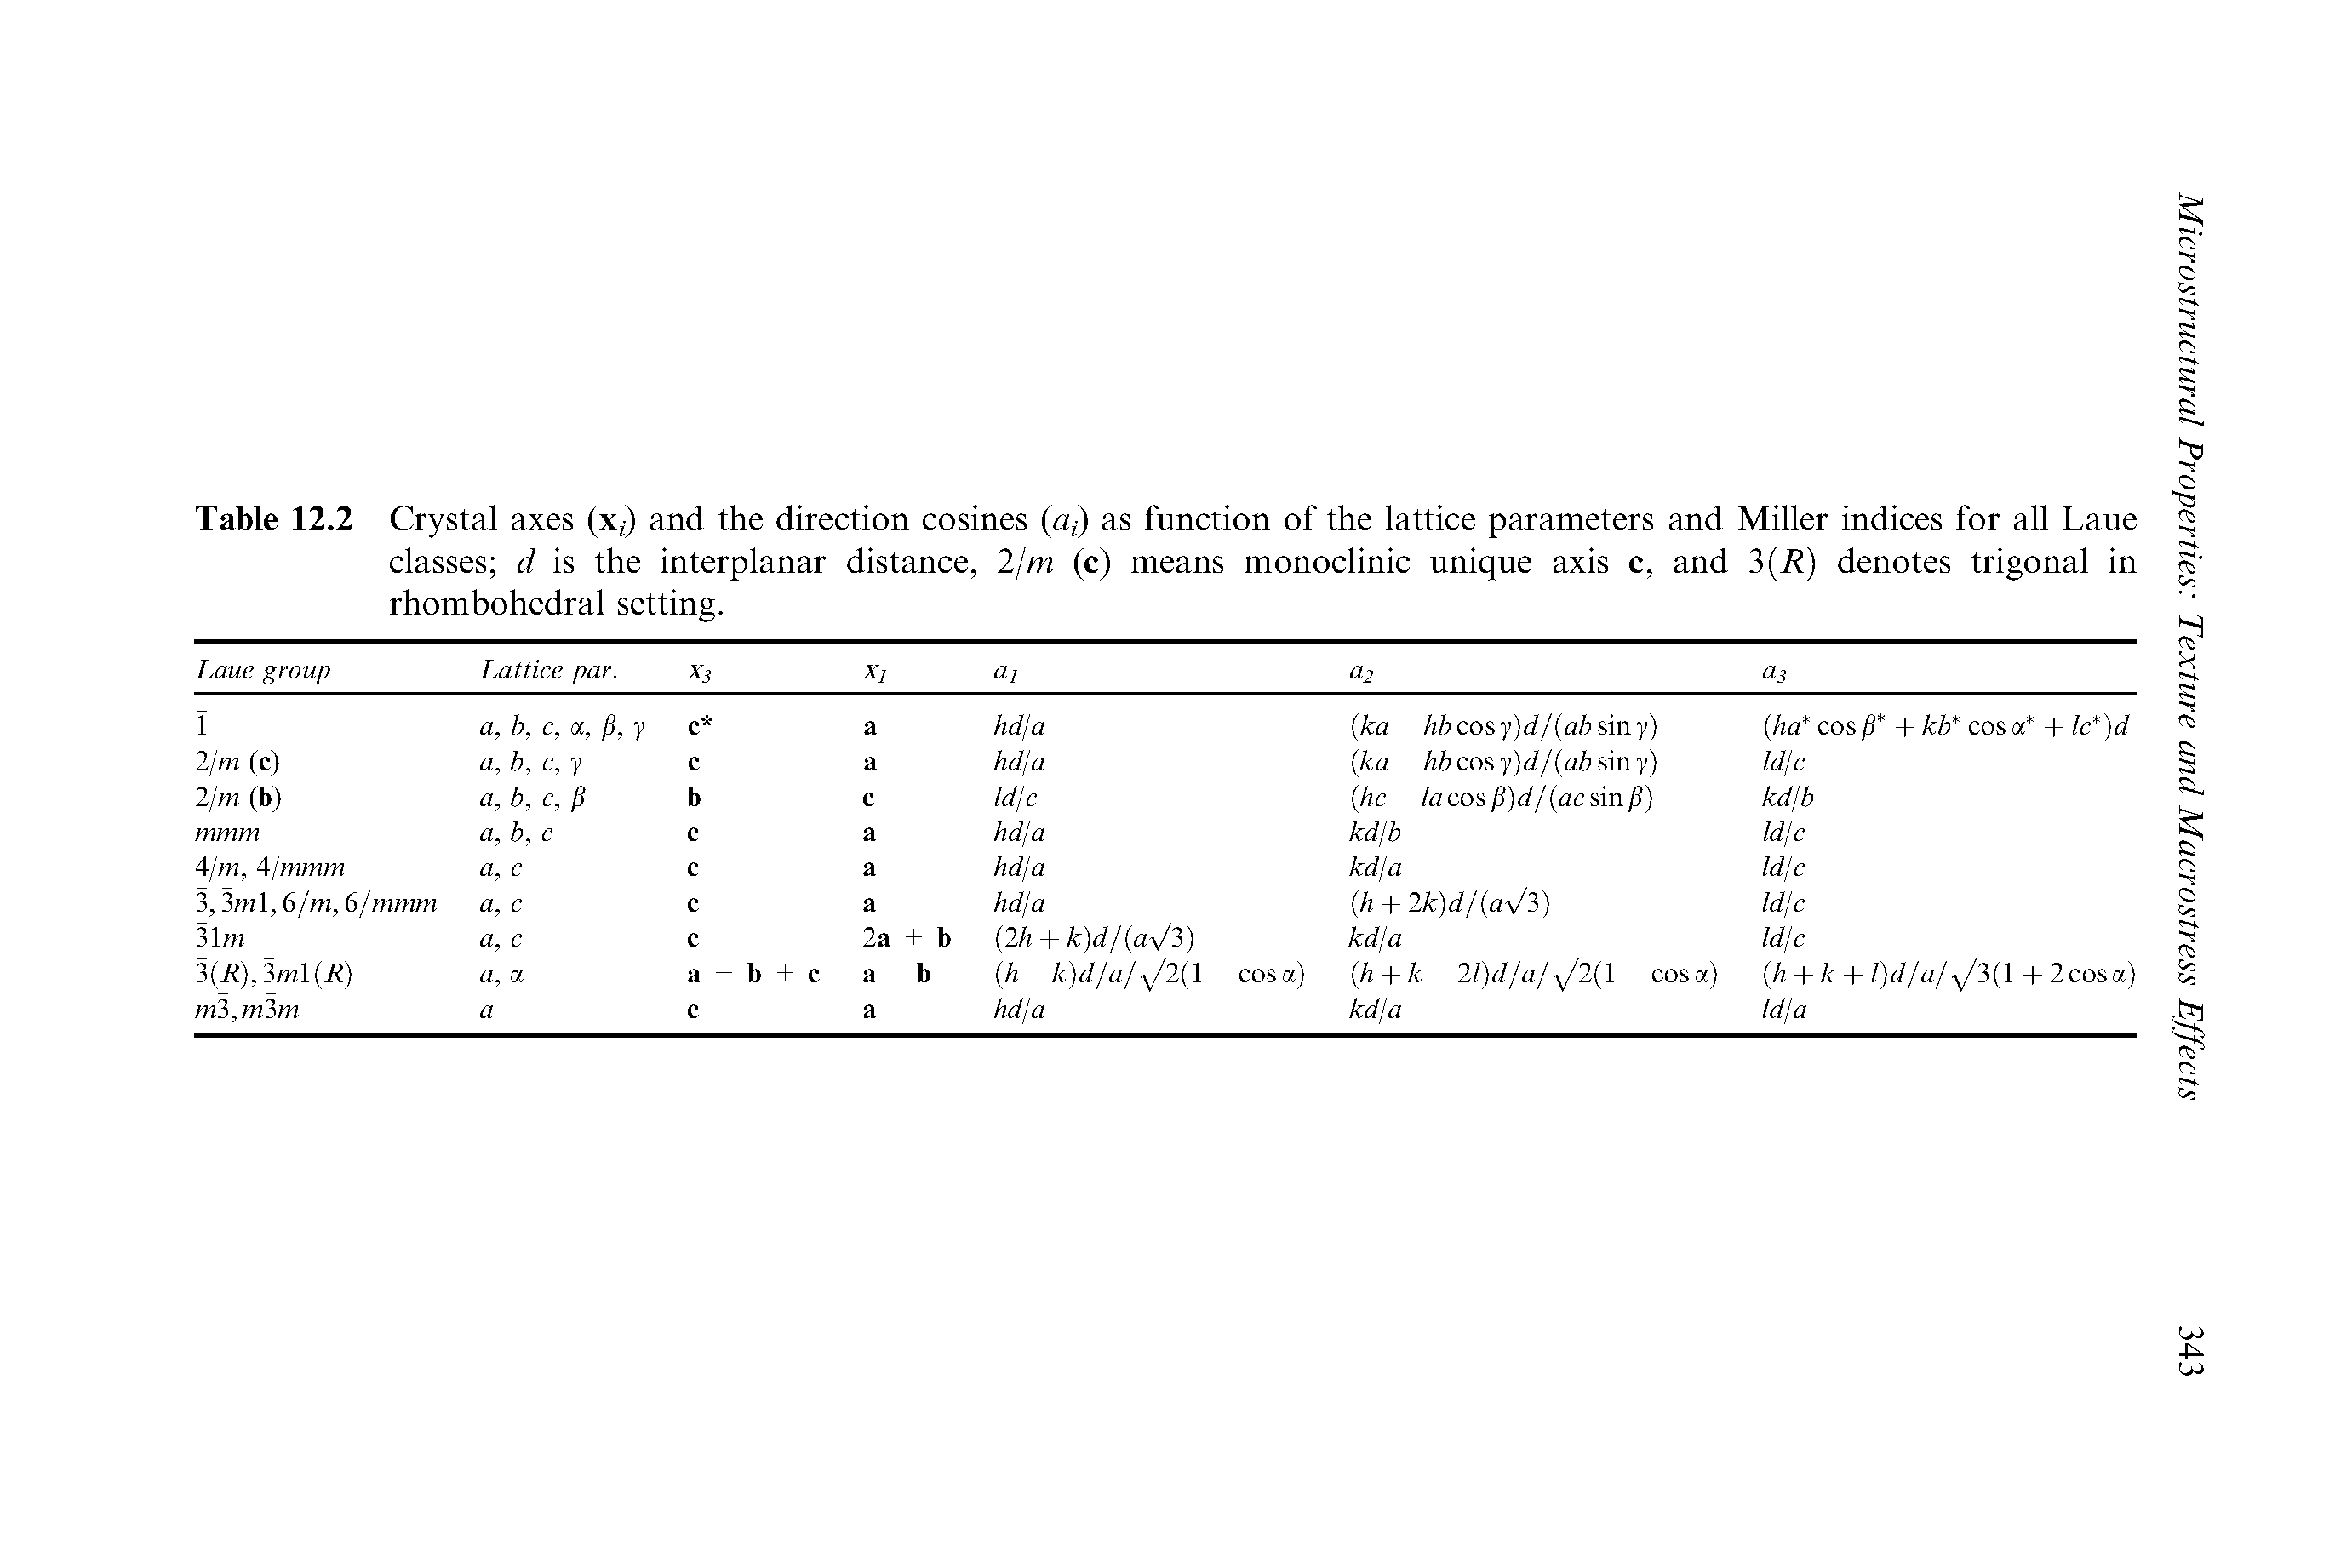 Table 12.2 Crystal axes (x ) and the direction cosines (a,) as function of the lattice parameters and Miller indices for all Laue classes d is the interplanar distance, Ijm (c) means monoclinic unique axis c, and 3(i ) denotes trigonal in rhombohedral setting.